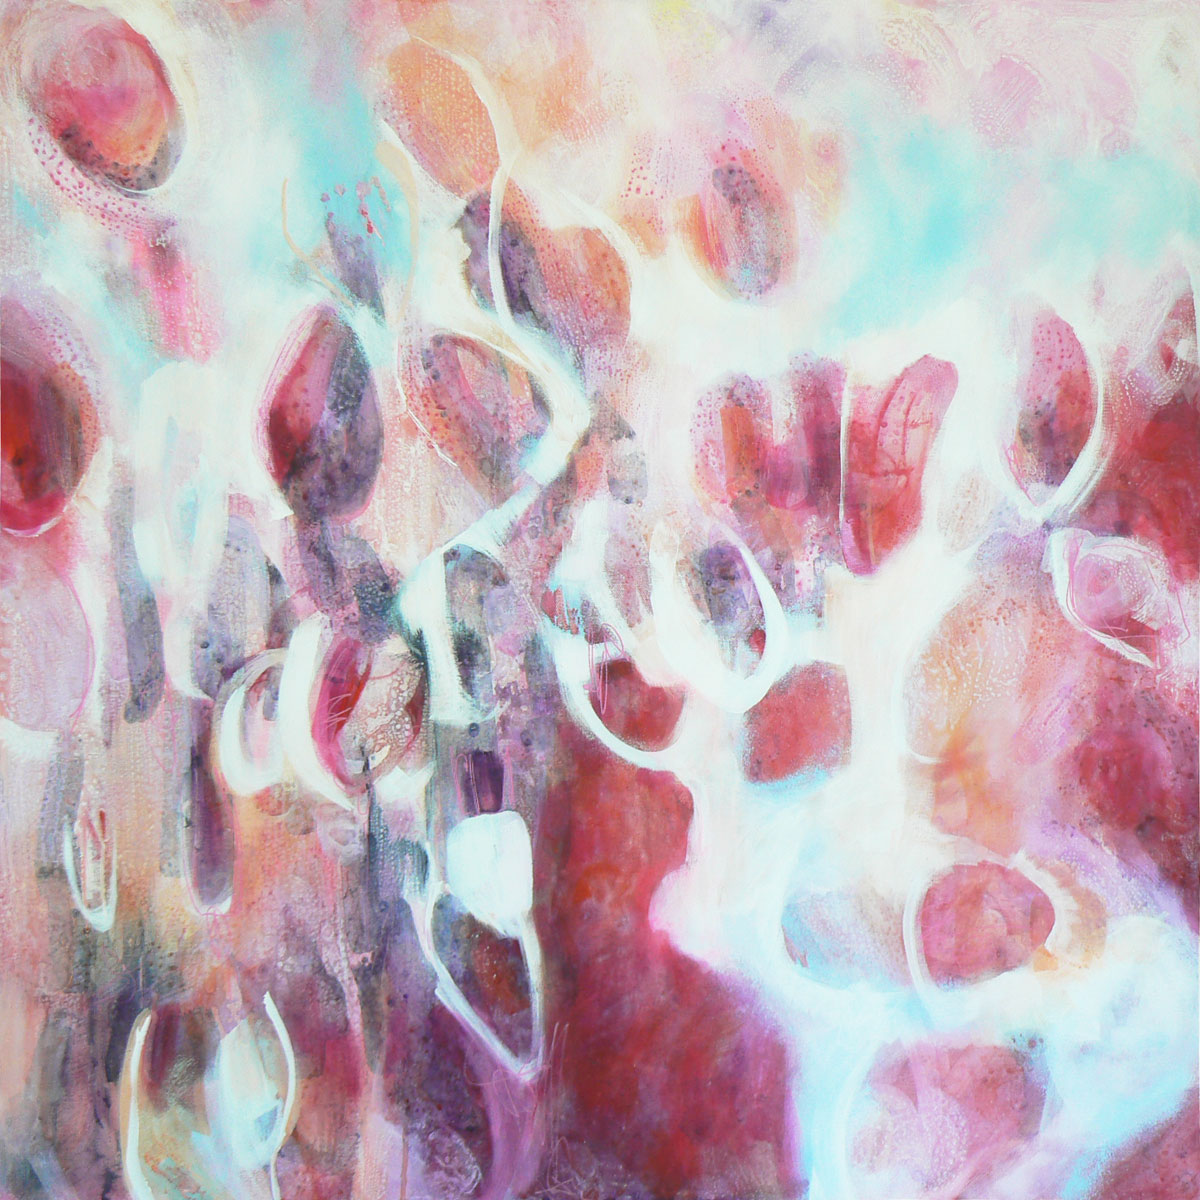 Sweet Chaos, 2015 Acrylic painting by Carolynne Coulson